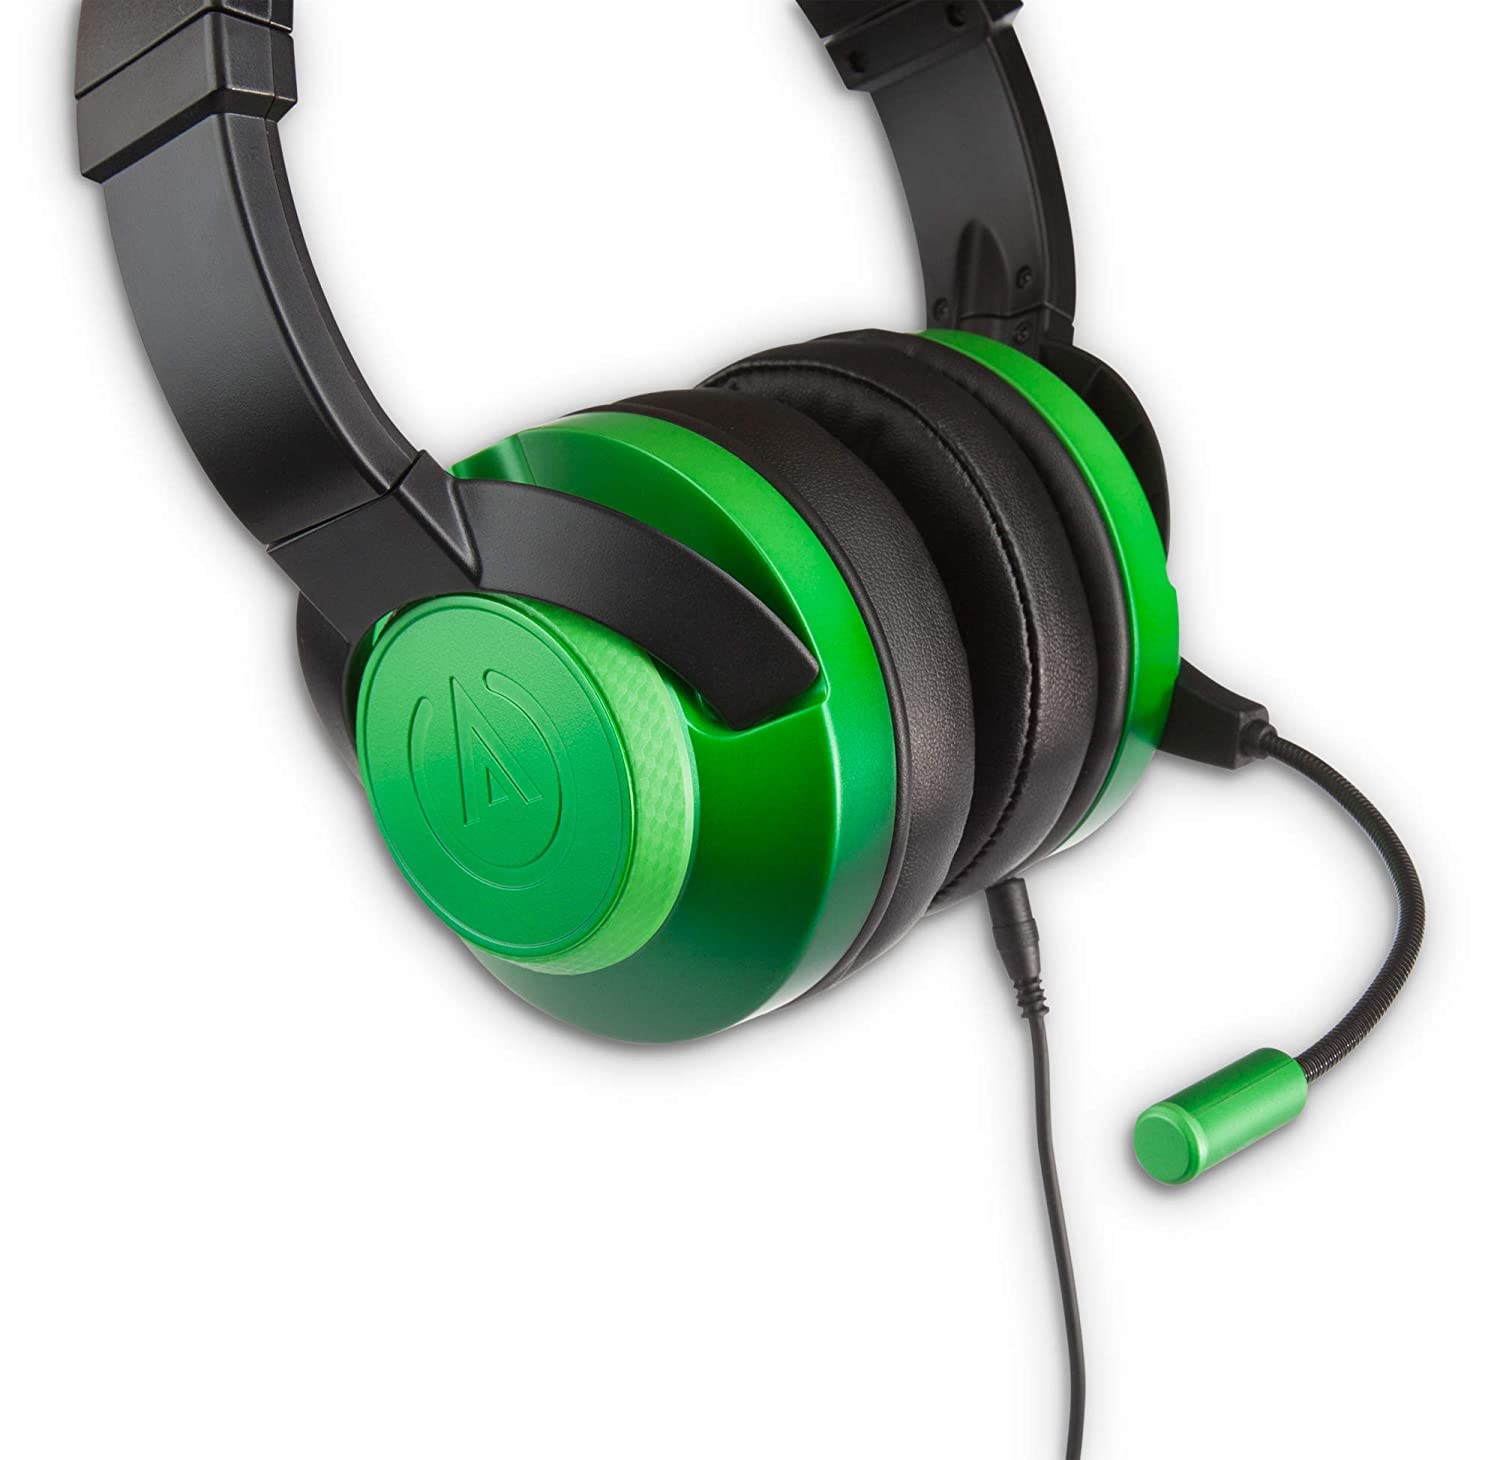 PowerA Fusion Wired Stereo Gaming Headset with Mic for PlayStation 4, Emerald Fade